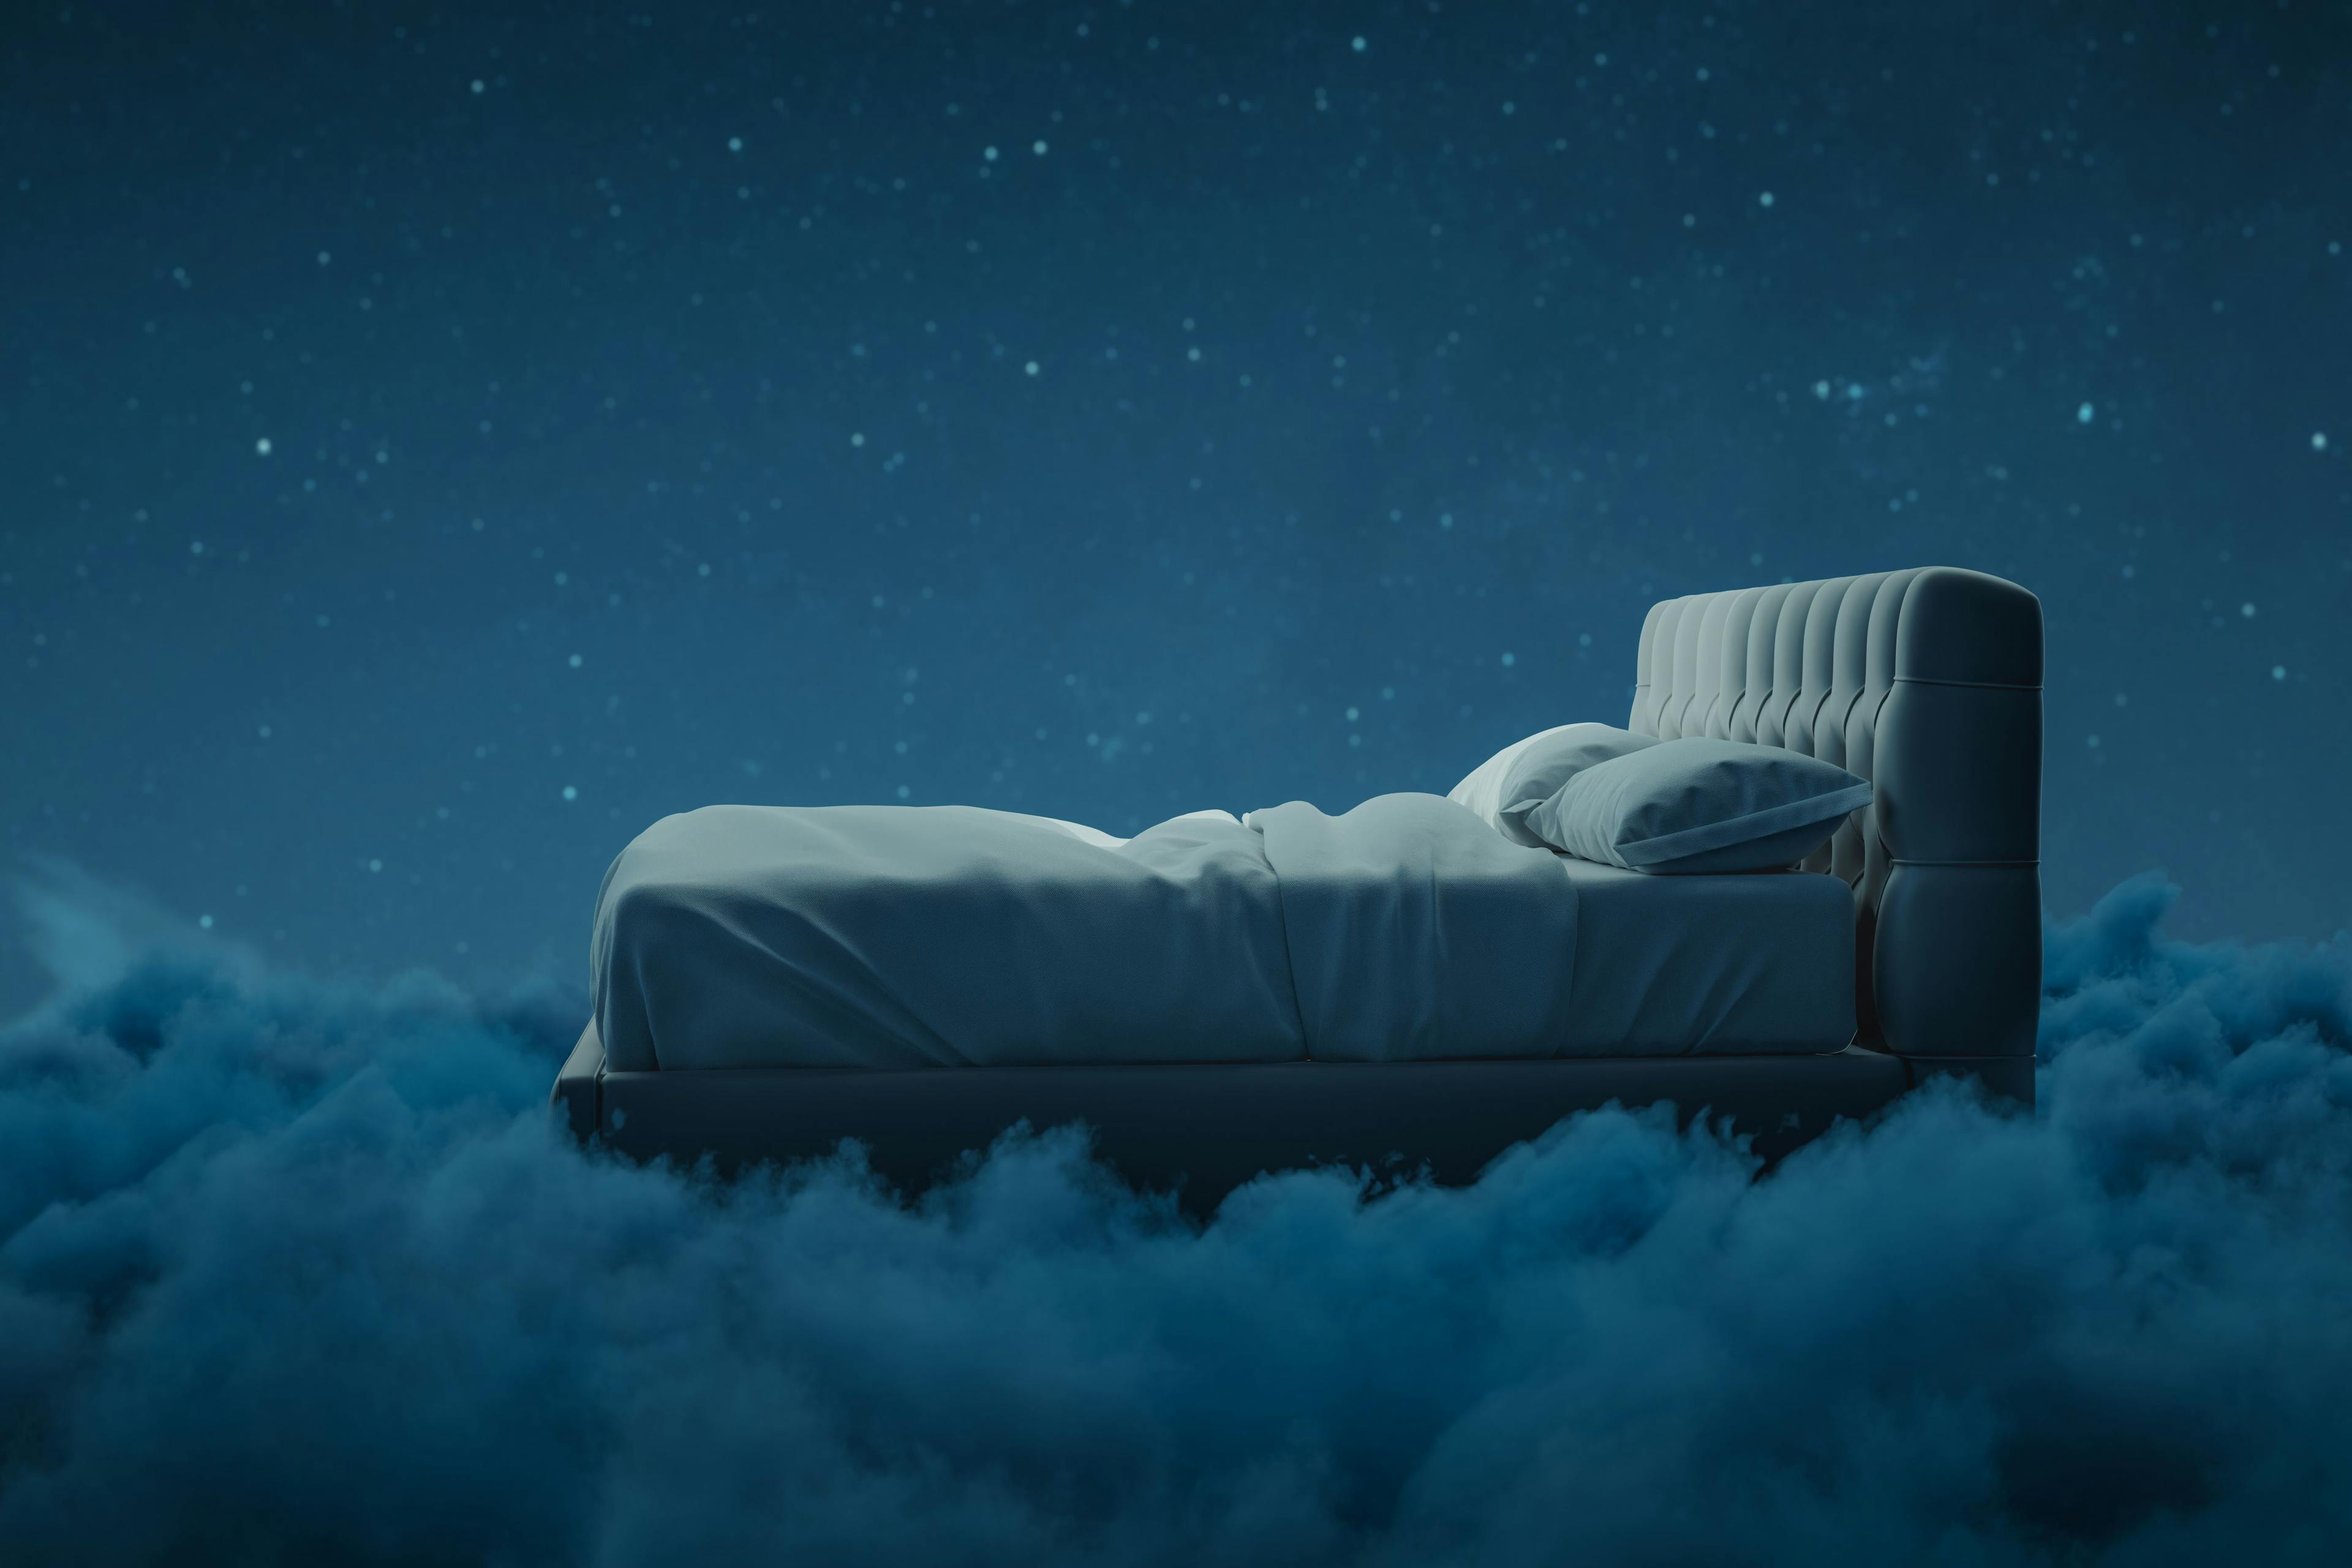 Bed Floating on Clouds | image credit: Brilliant Eye - stock.adobe.com